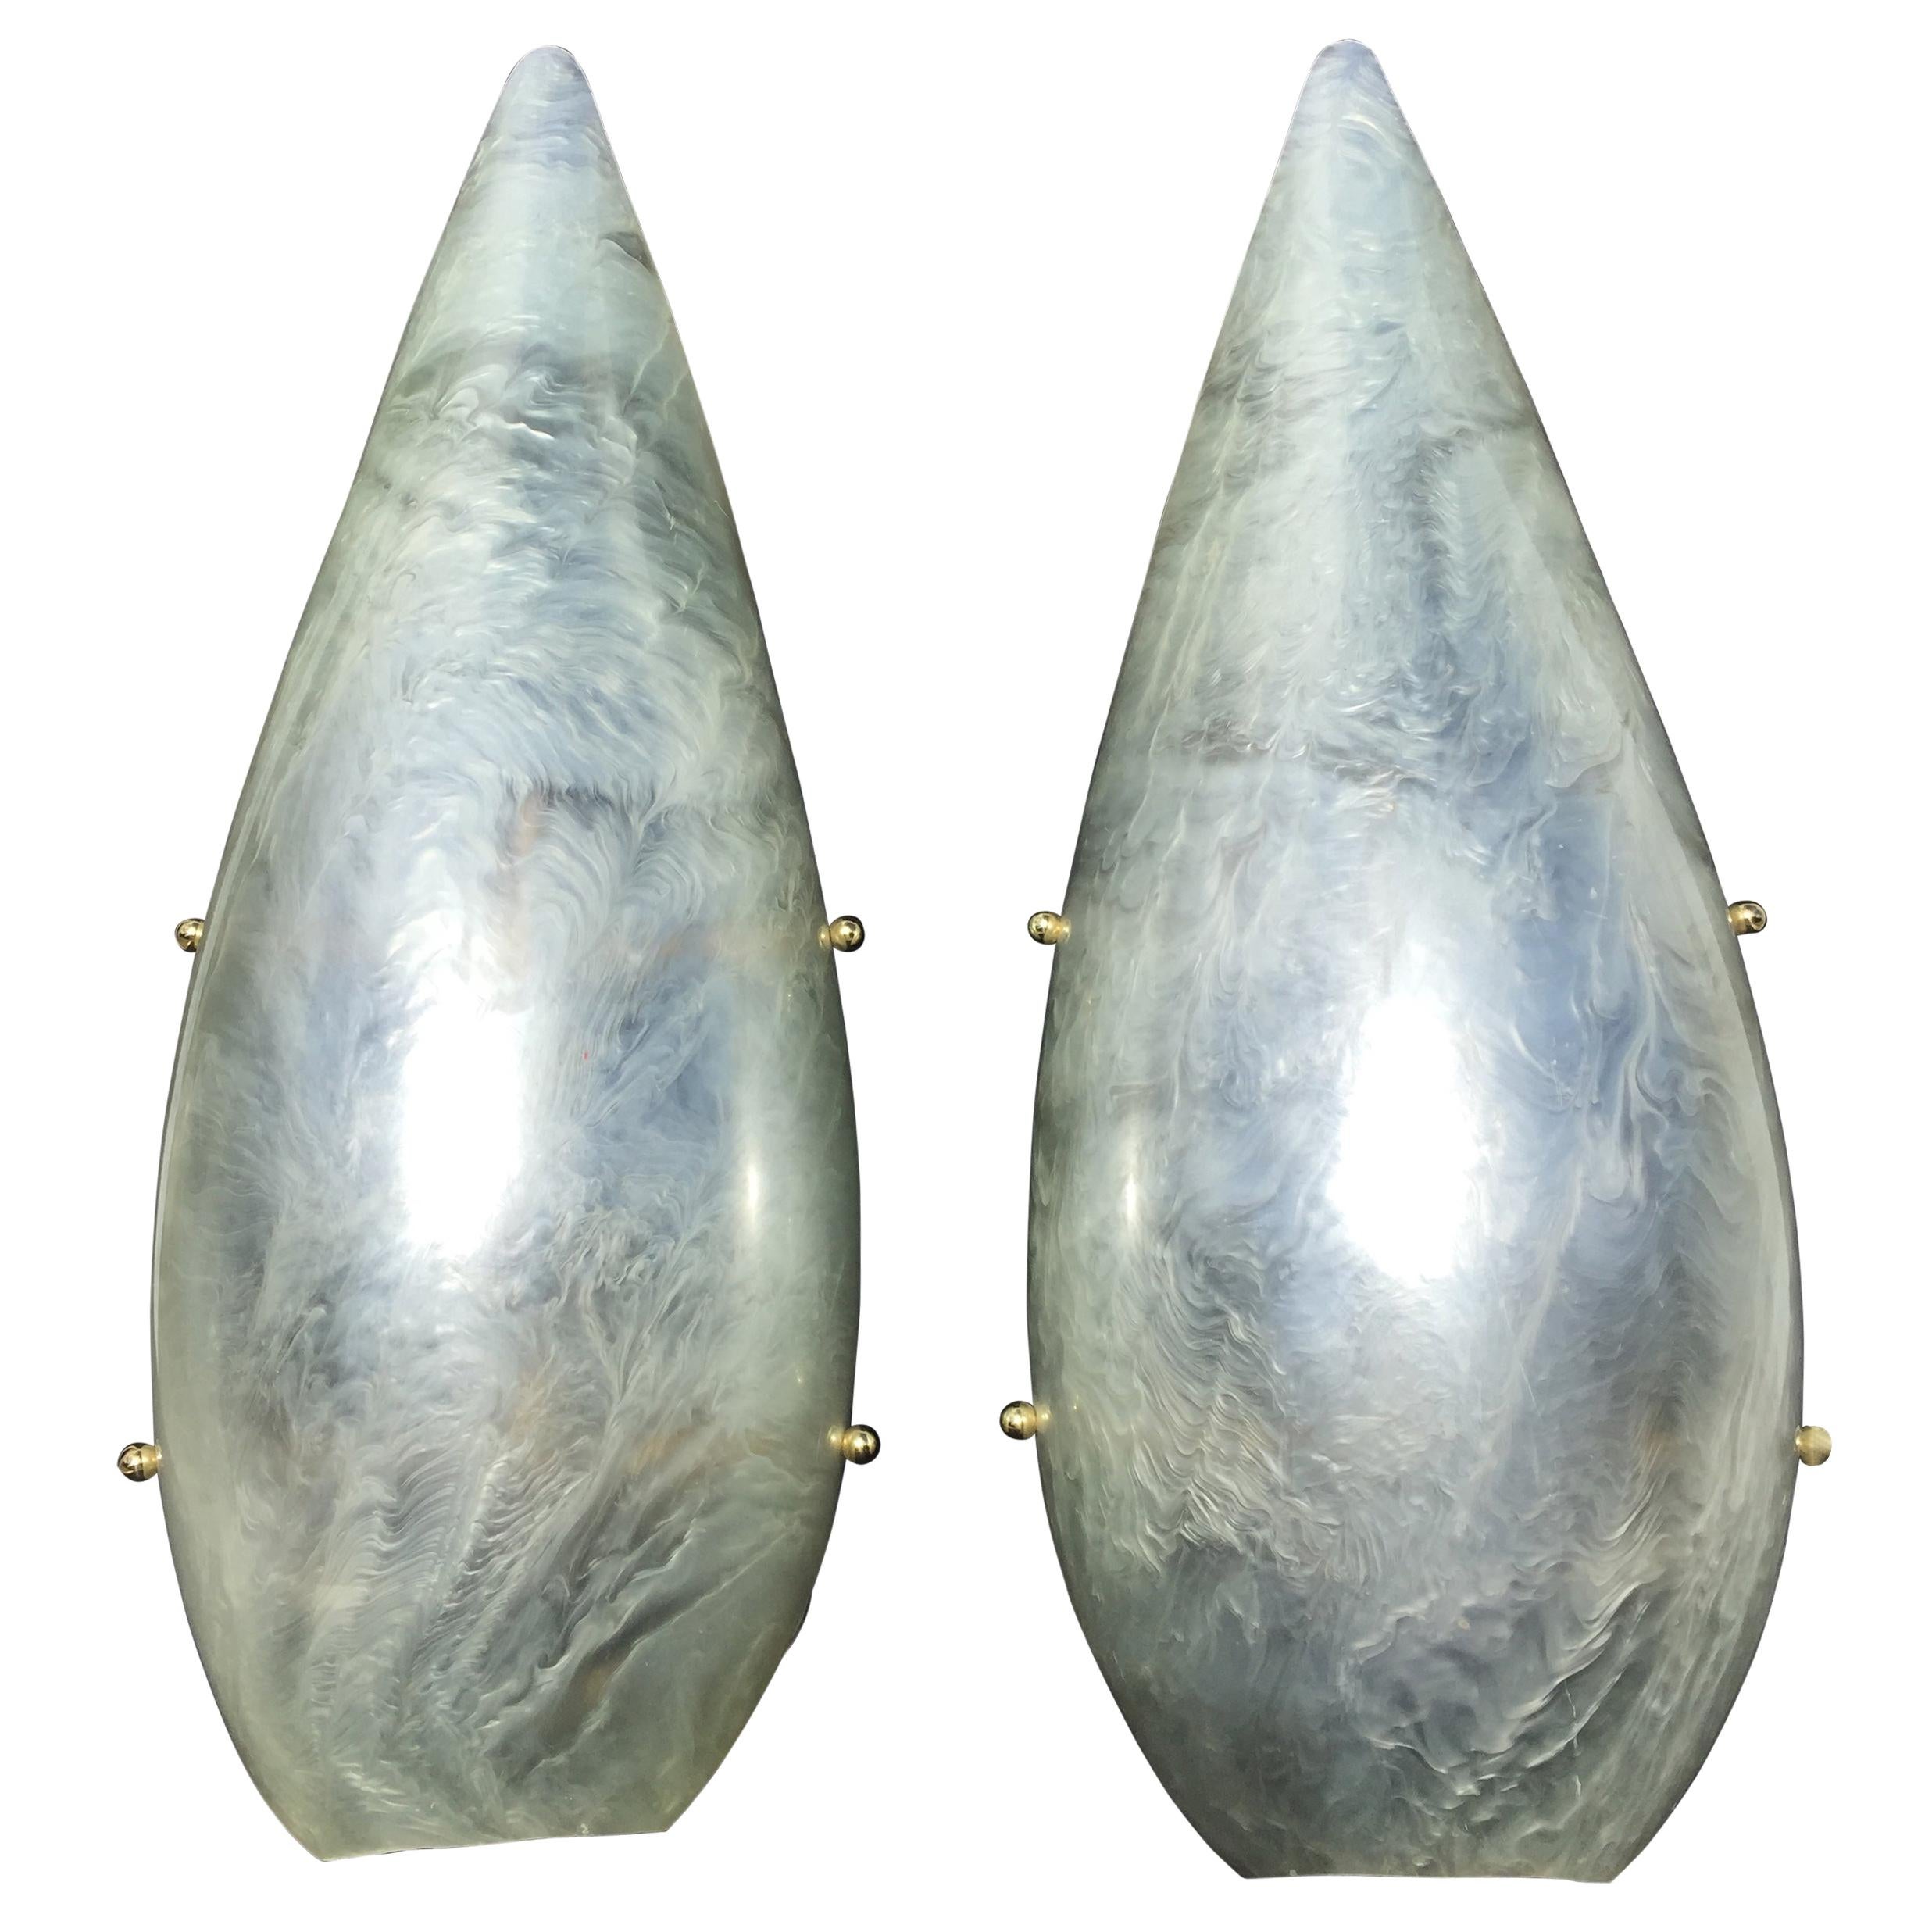 Pair of Pearly White Resin Wall Sconces Italian Mid-Century Modern Design